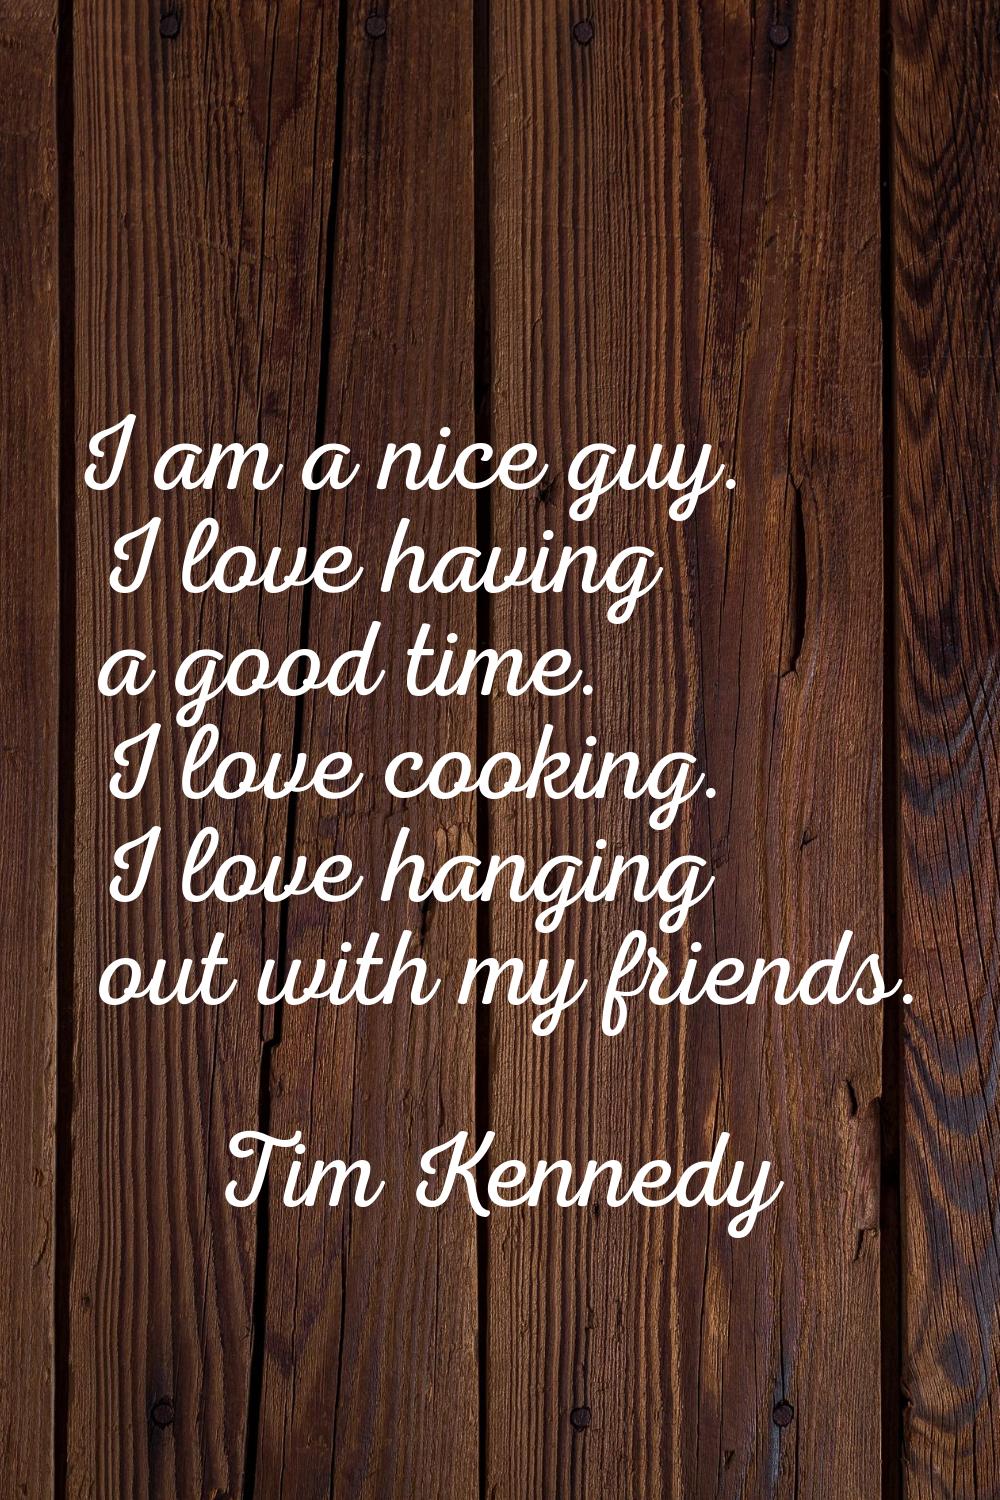 I am a nice guy. I love having a good time. I love cooking. I love hanging out with my friends.